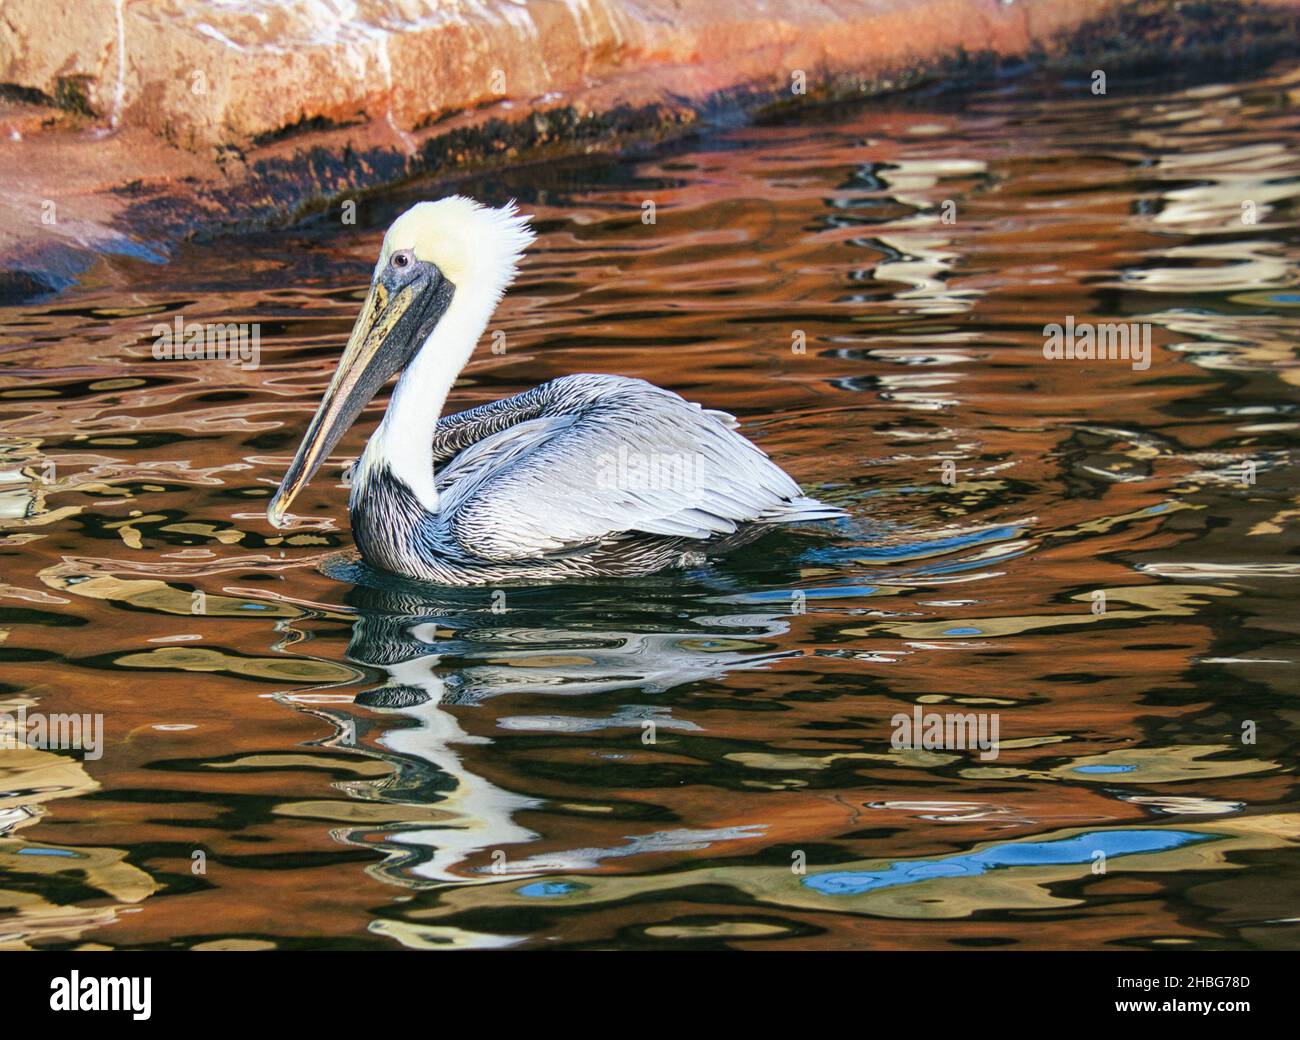 pelican on the water while swimming. large seabird with richly textured plumage. Bird in portrait. Stock Photo